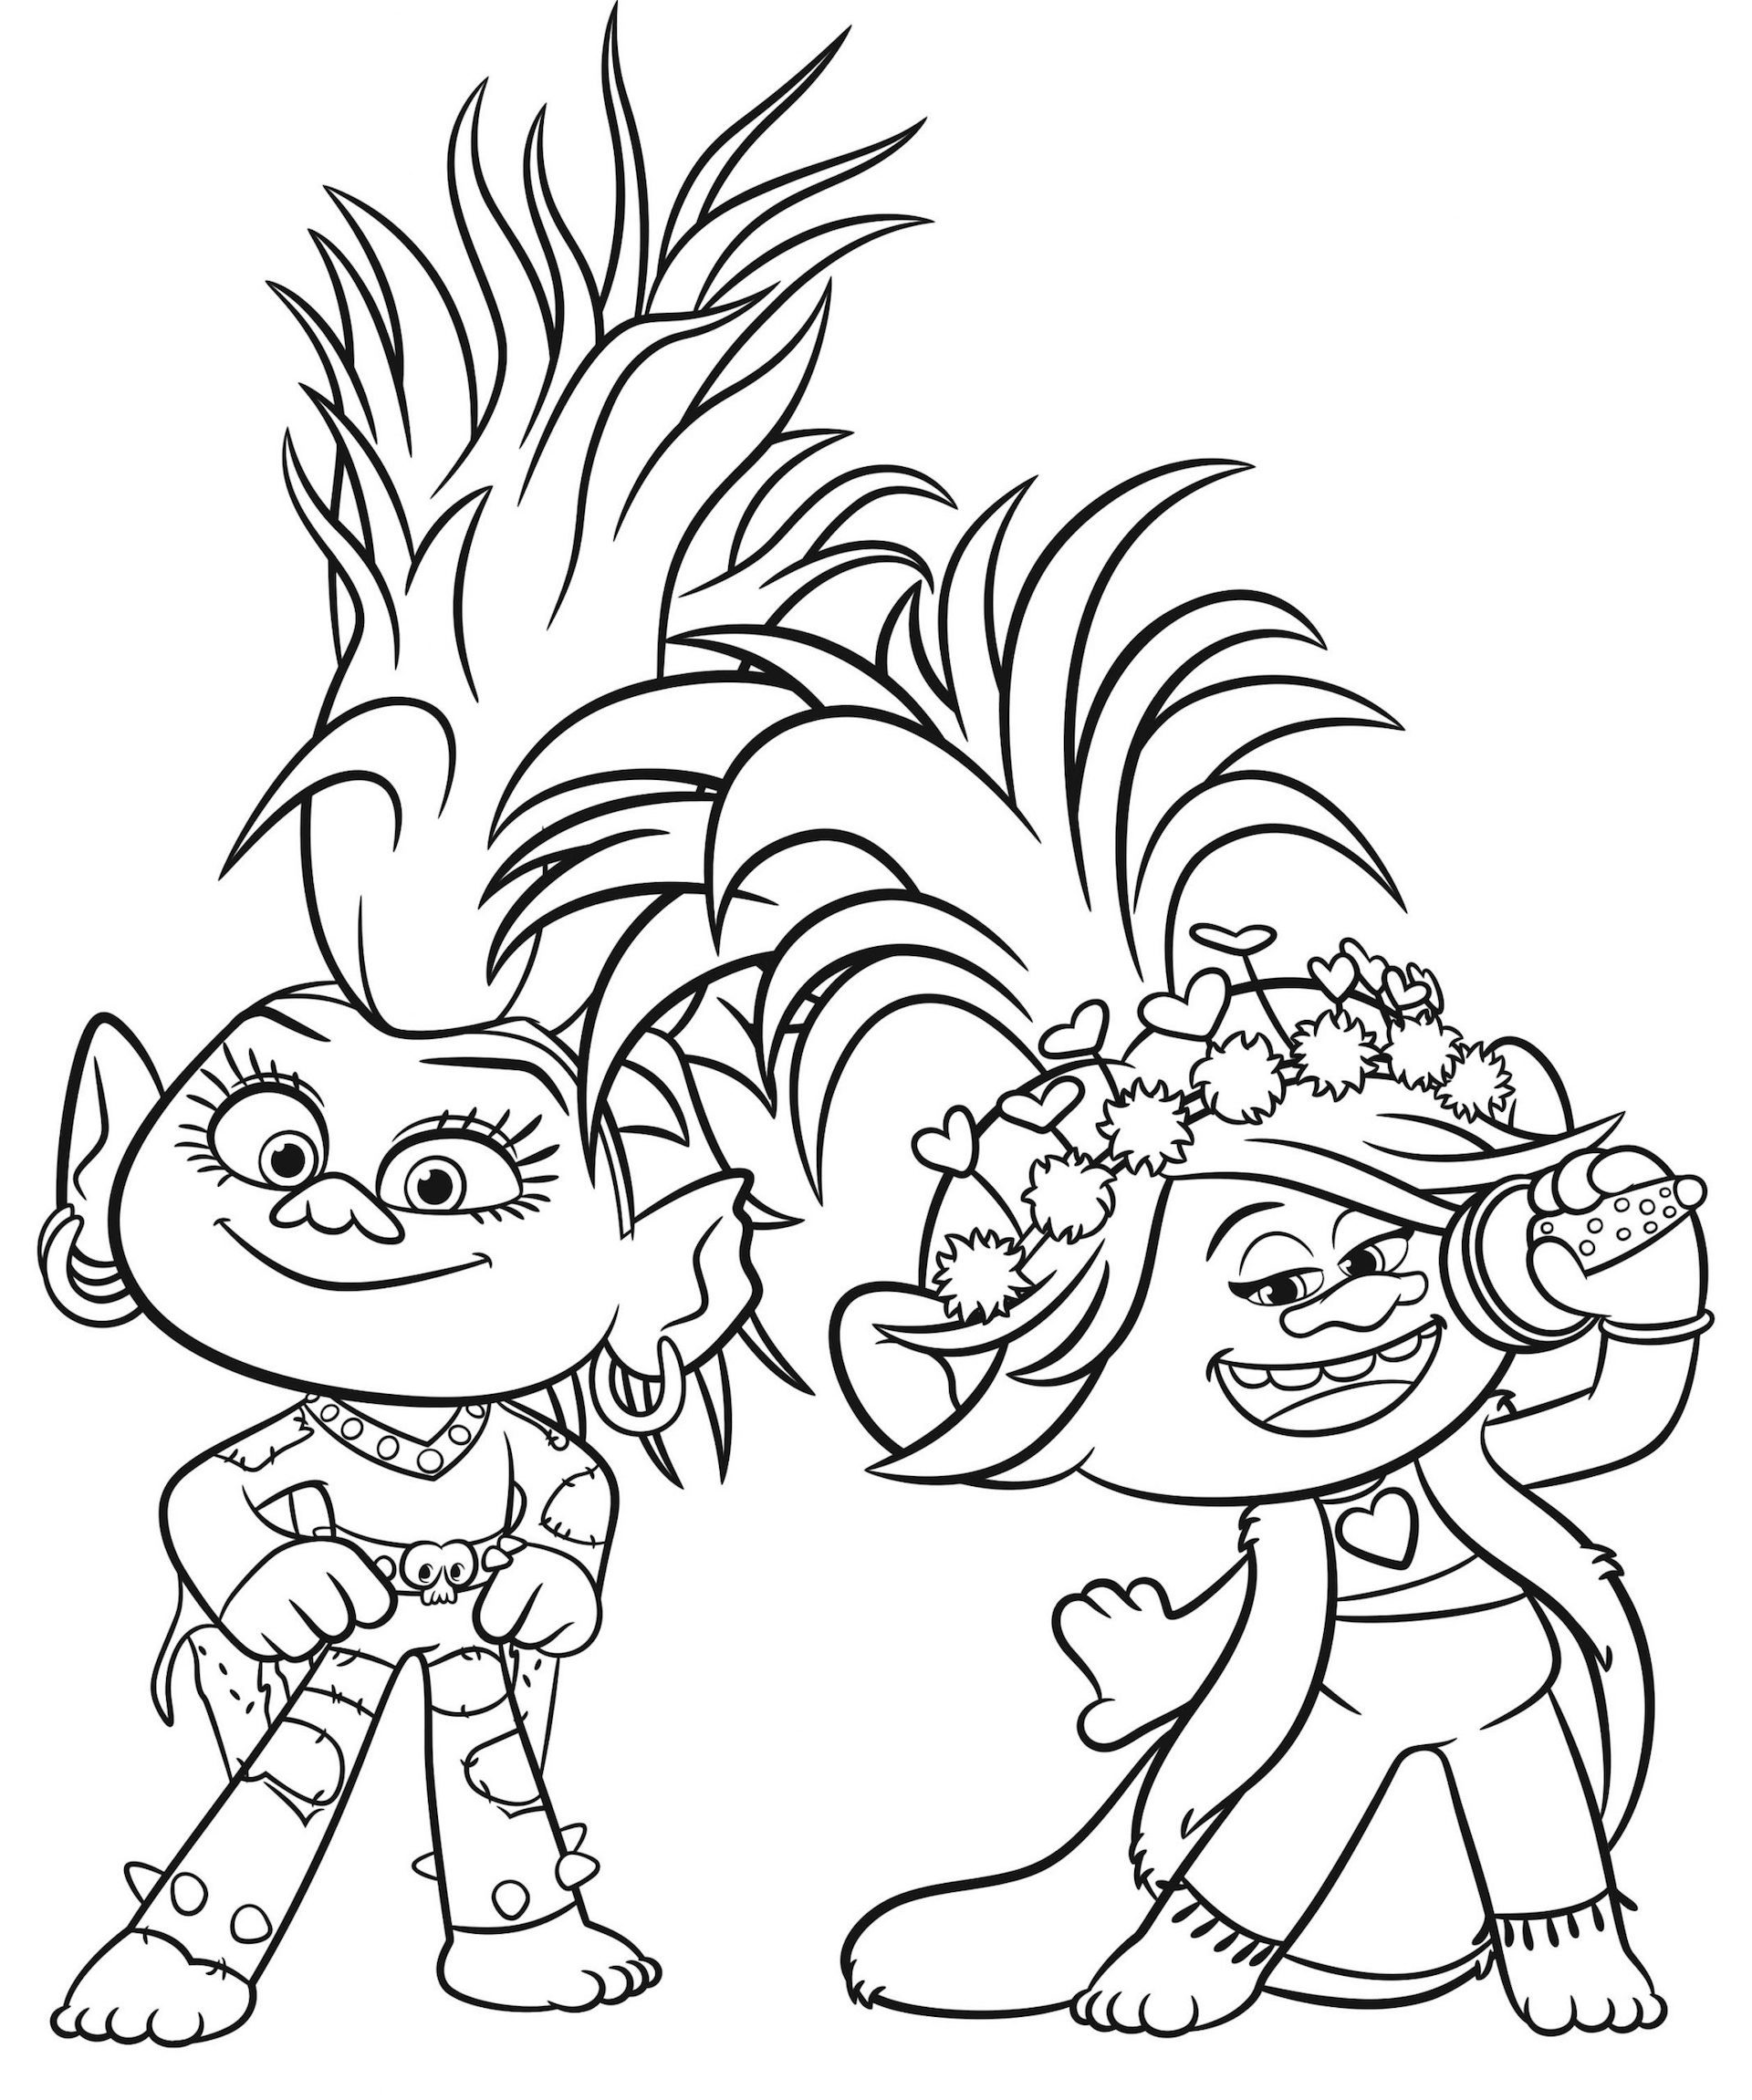 Trolls 2 Coloring Pages book for kids Best Trolls Coloring pages